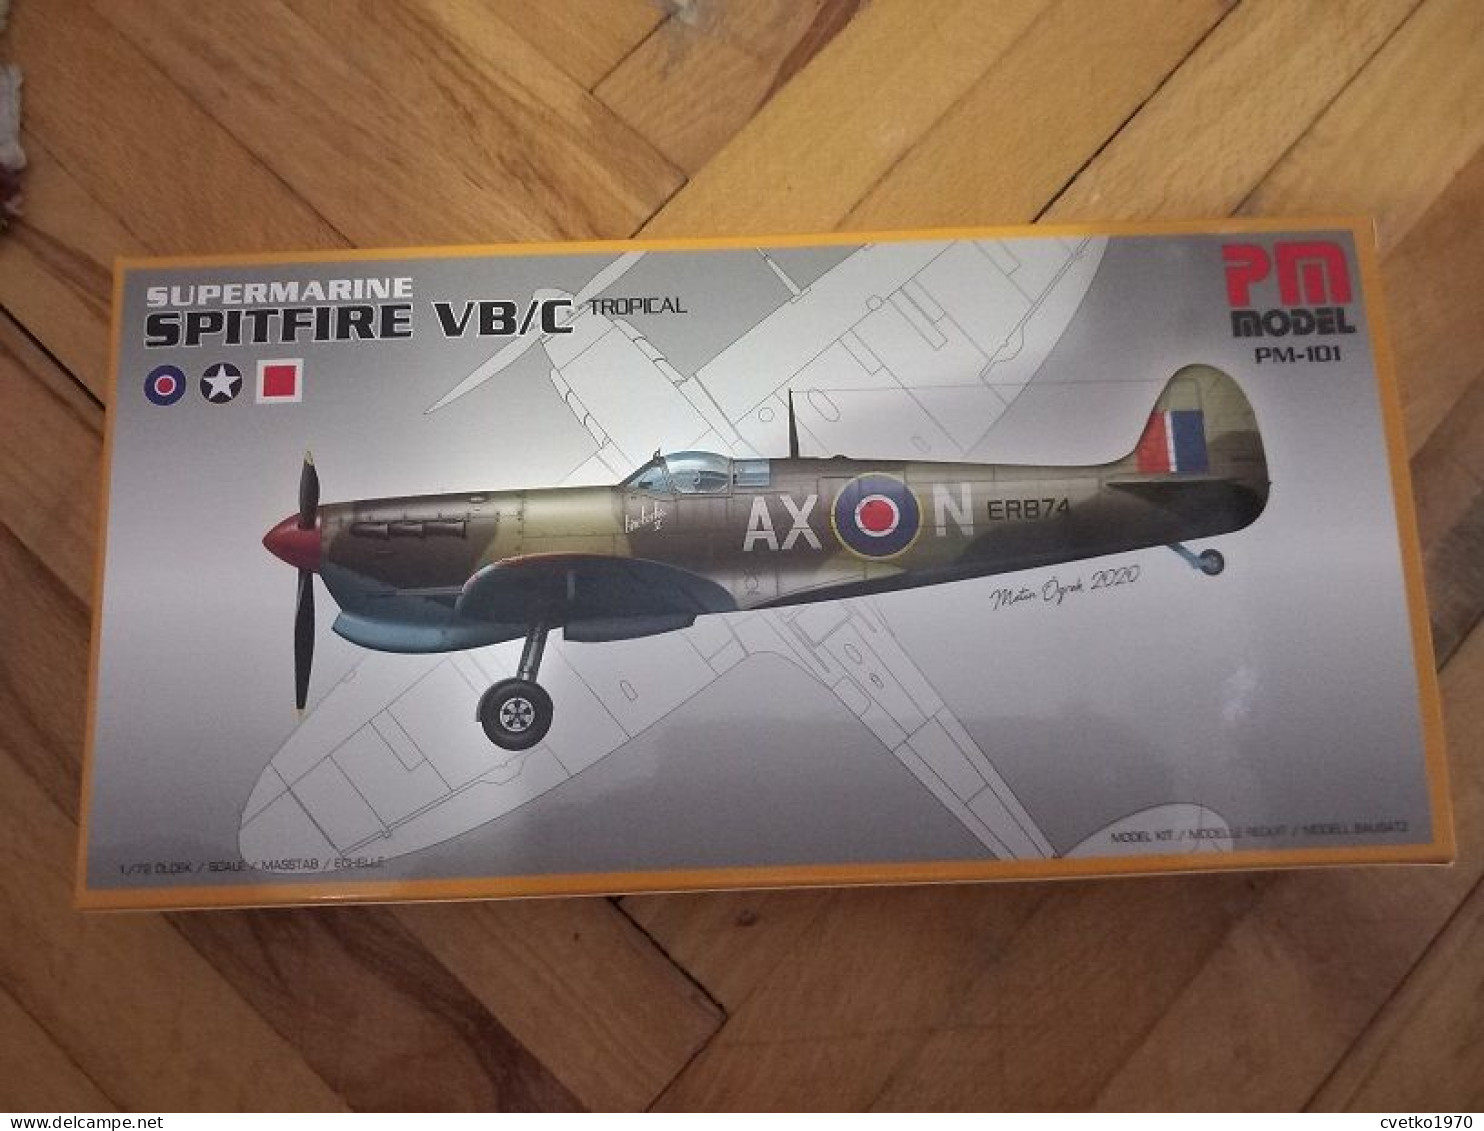 Supermarine Spitfire VB/C Tropical, 1/72, PM Model - Airplanes & Helicopters